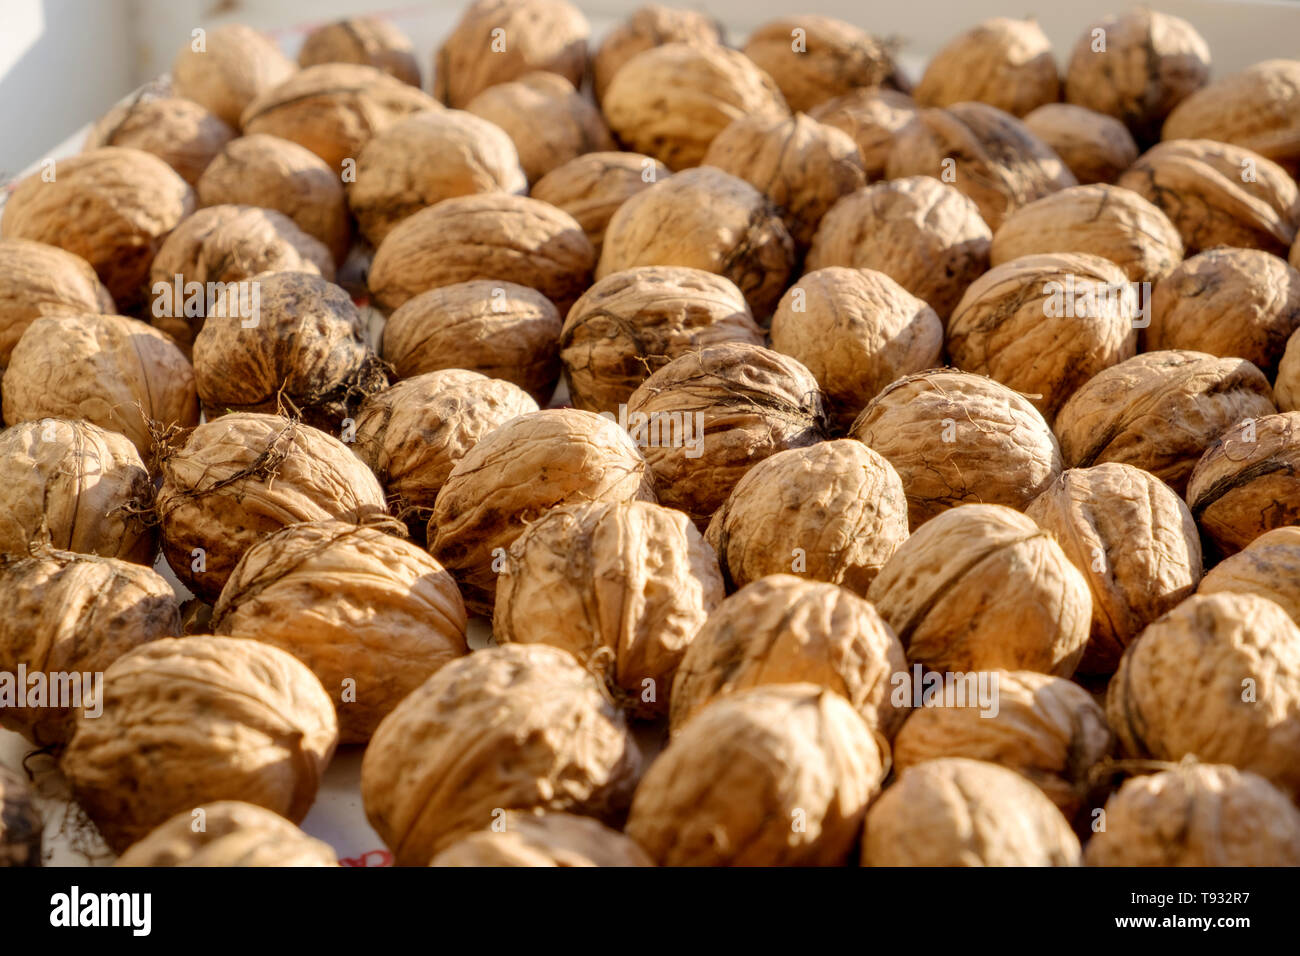 Walnuts laid out on a tray Stock Photo